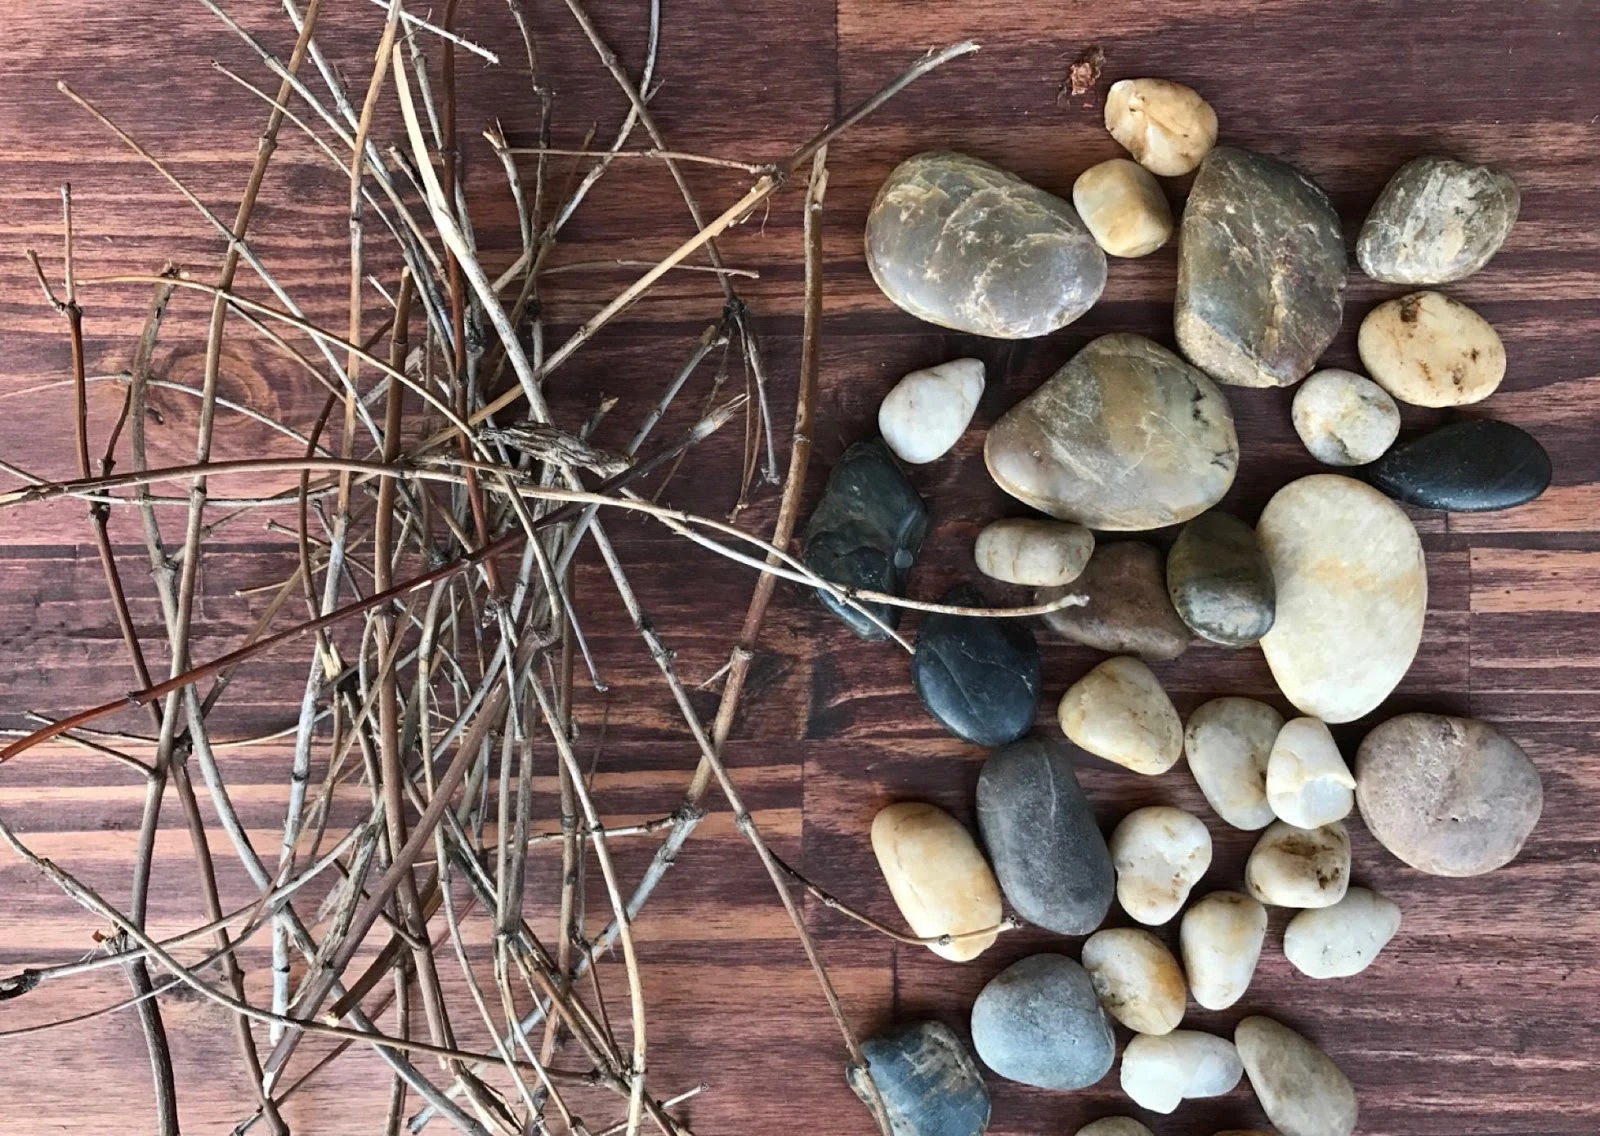 Loose Parts: Let's Play With Nature! - Wunderled